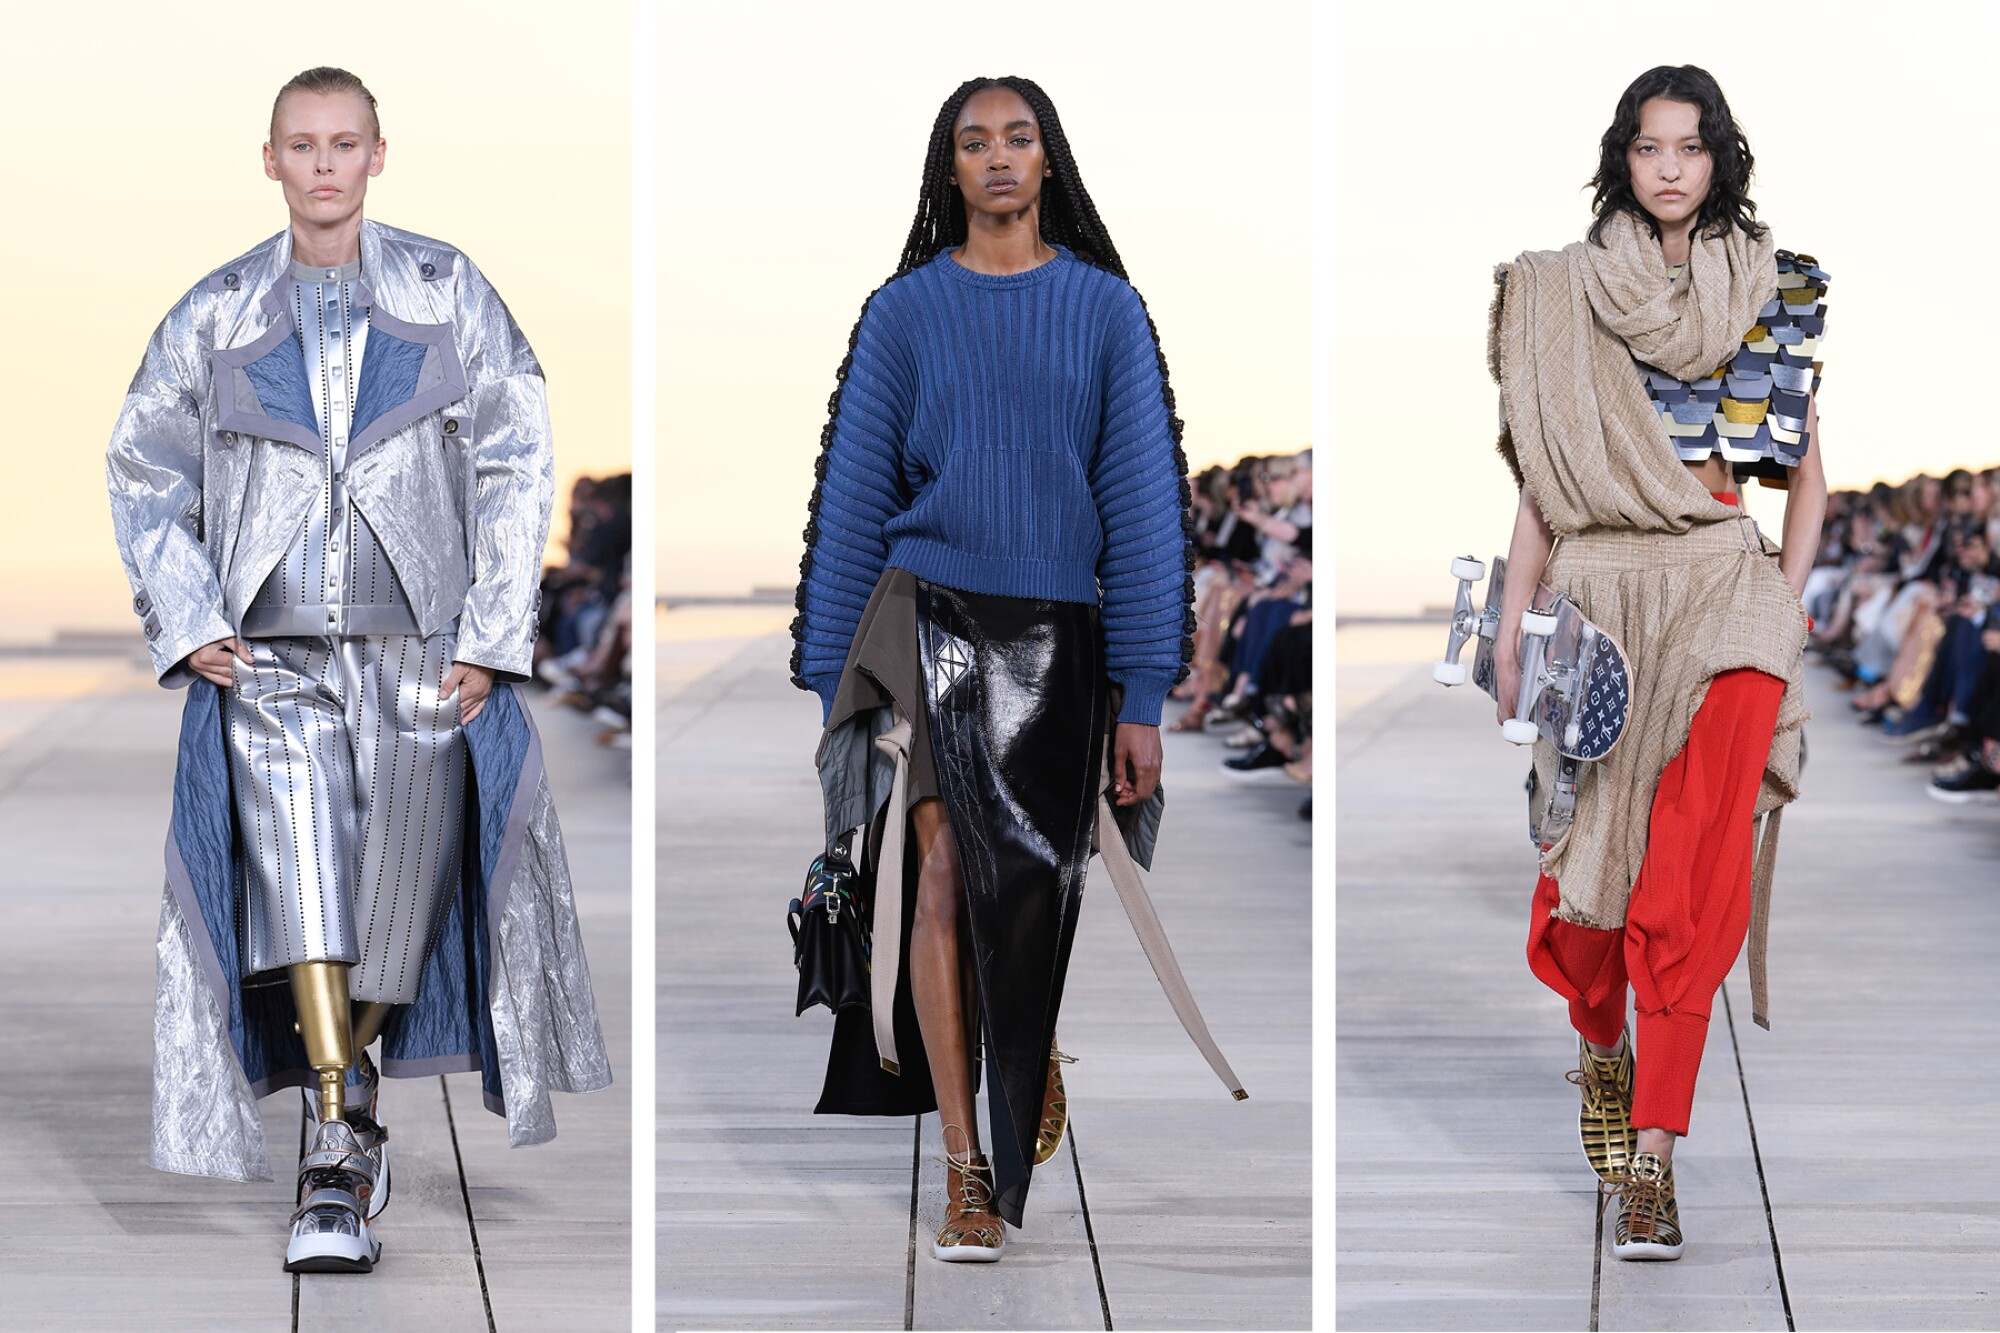 The looks from the Louis Vuitton Cruise 2023 collection evoked an aura of medieval, millennial style.